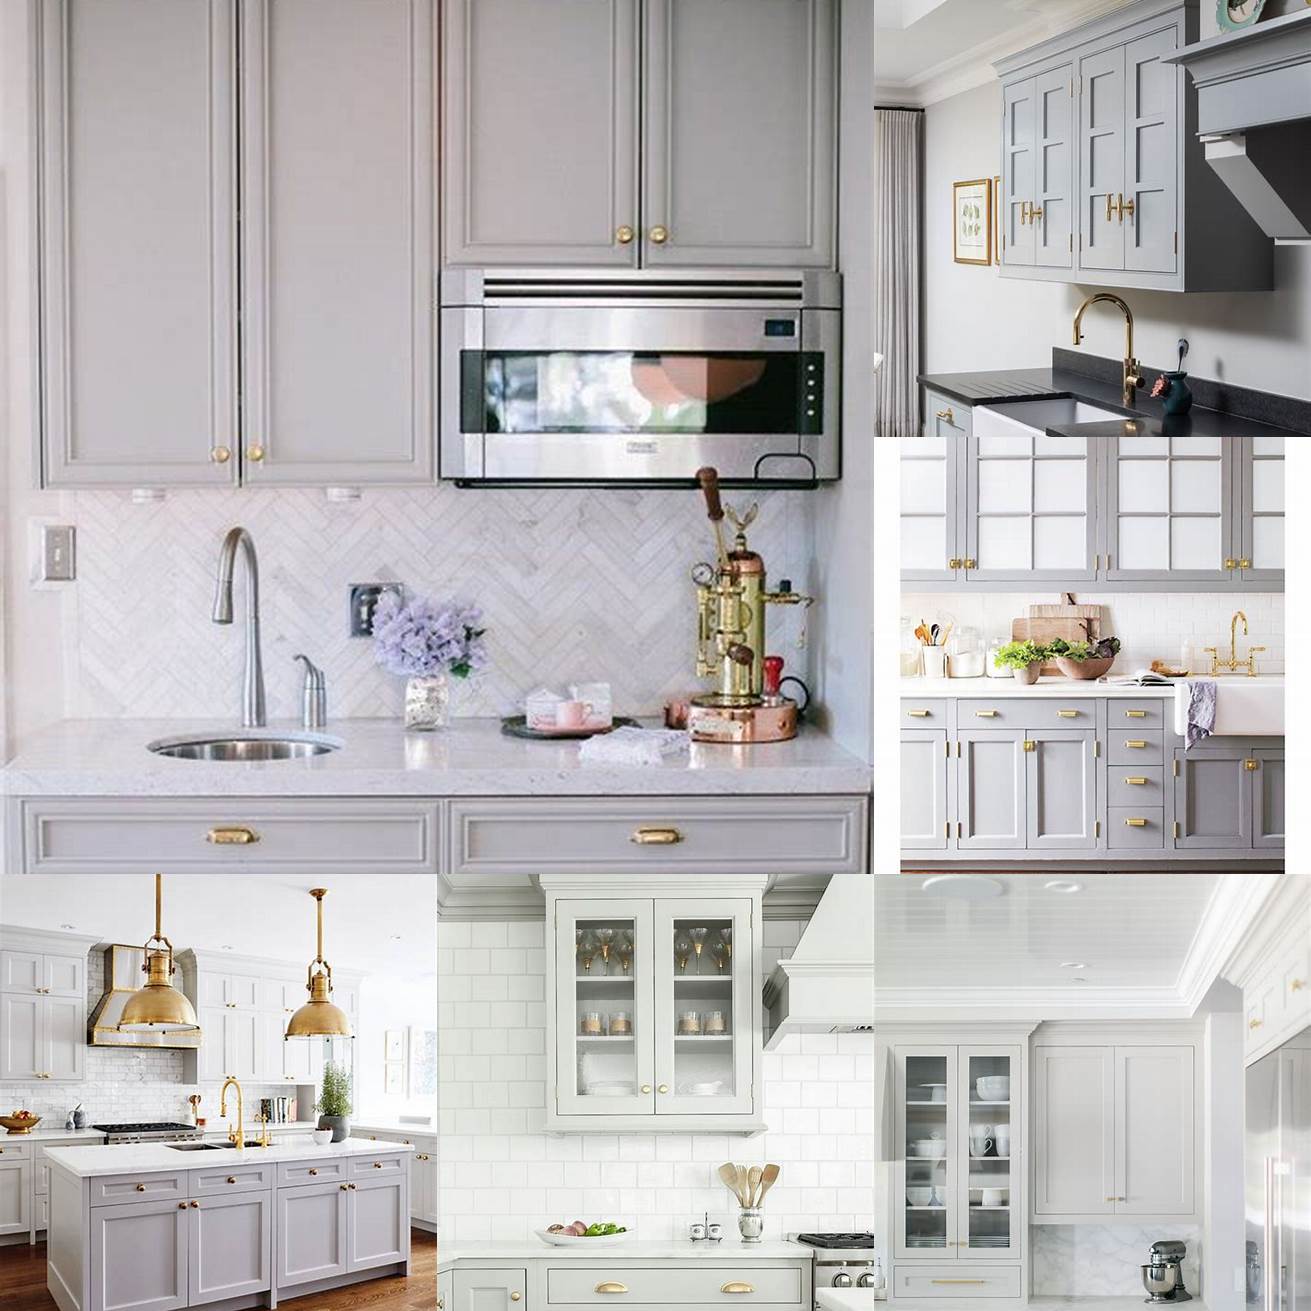 Grey cabinets with brass hardware